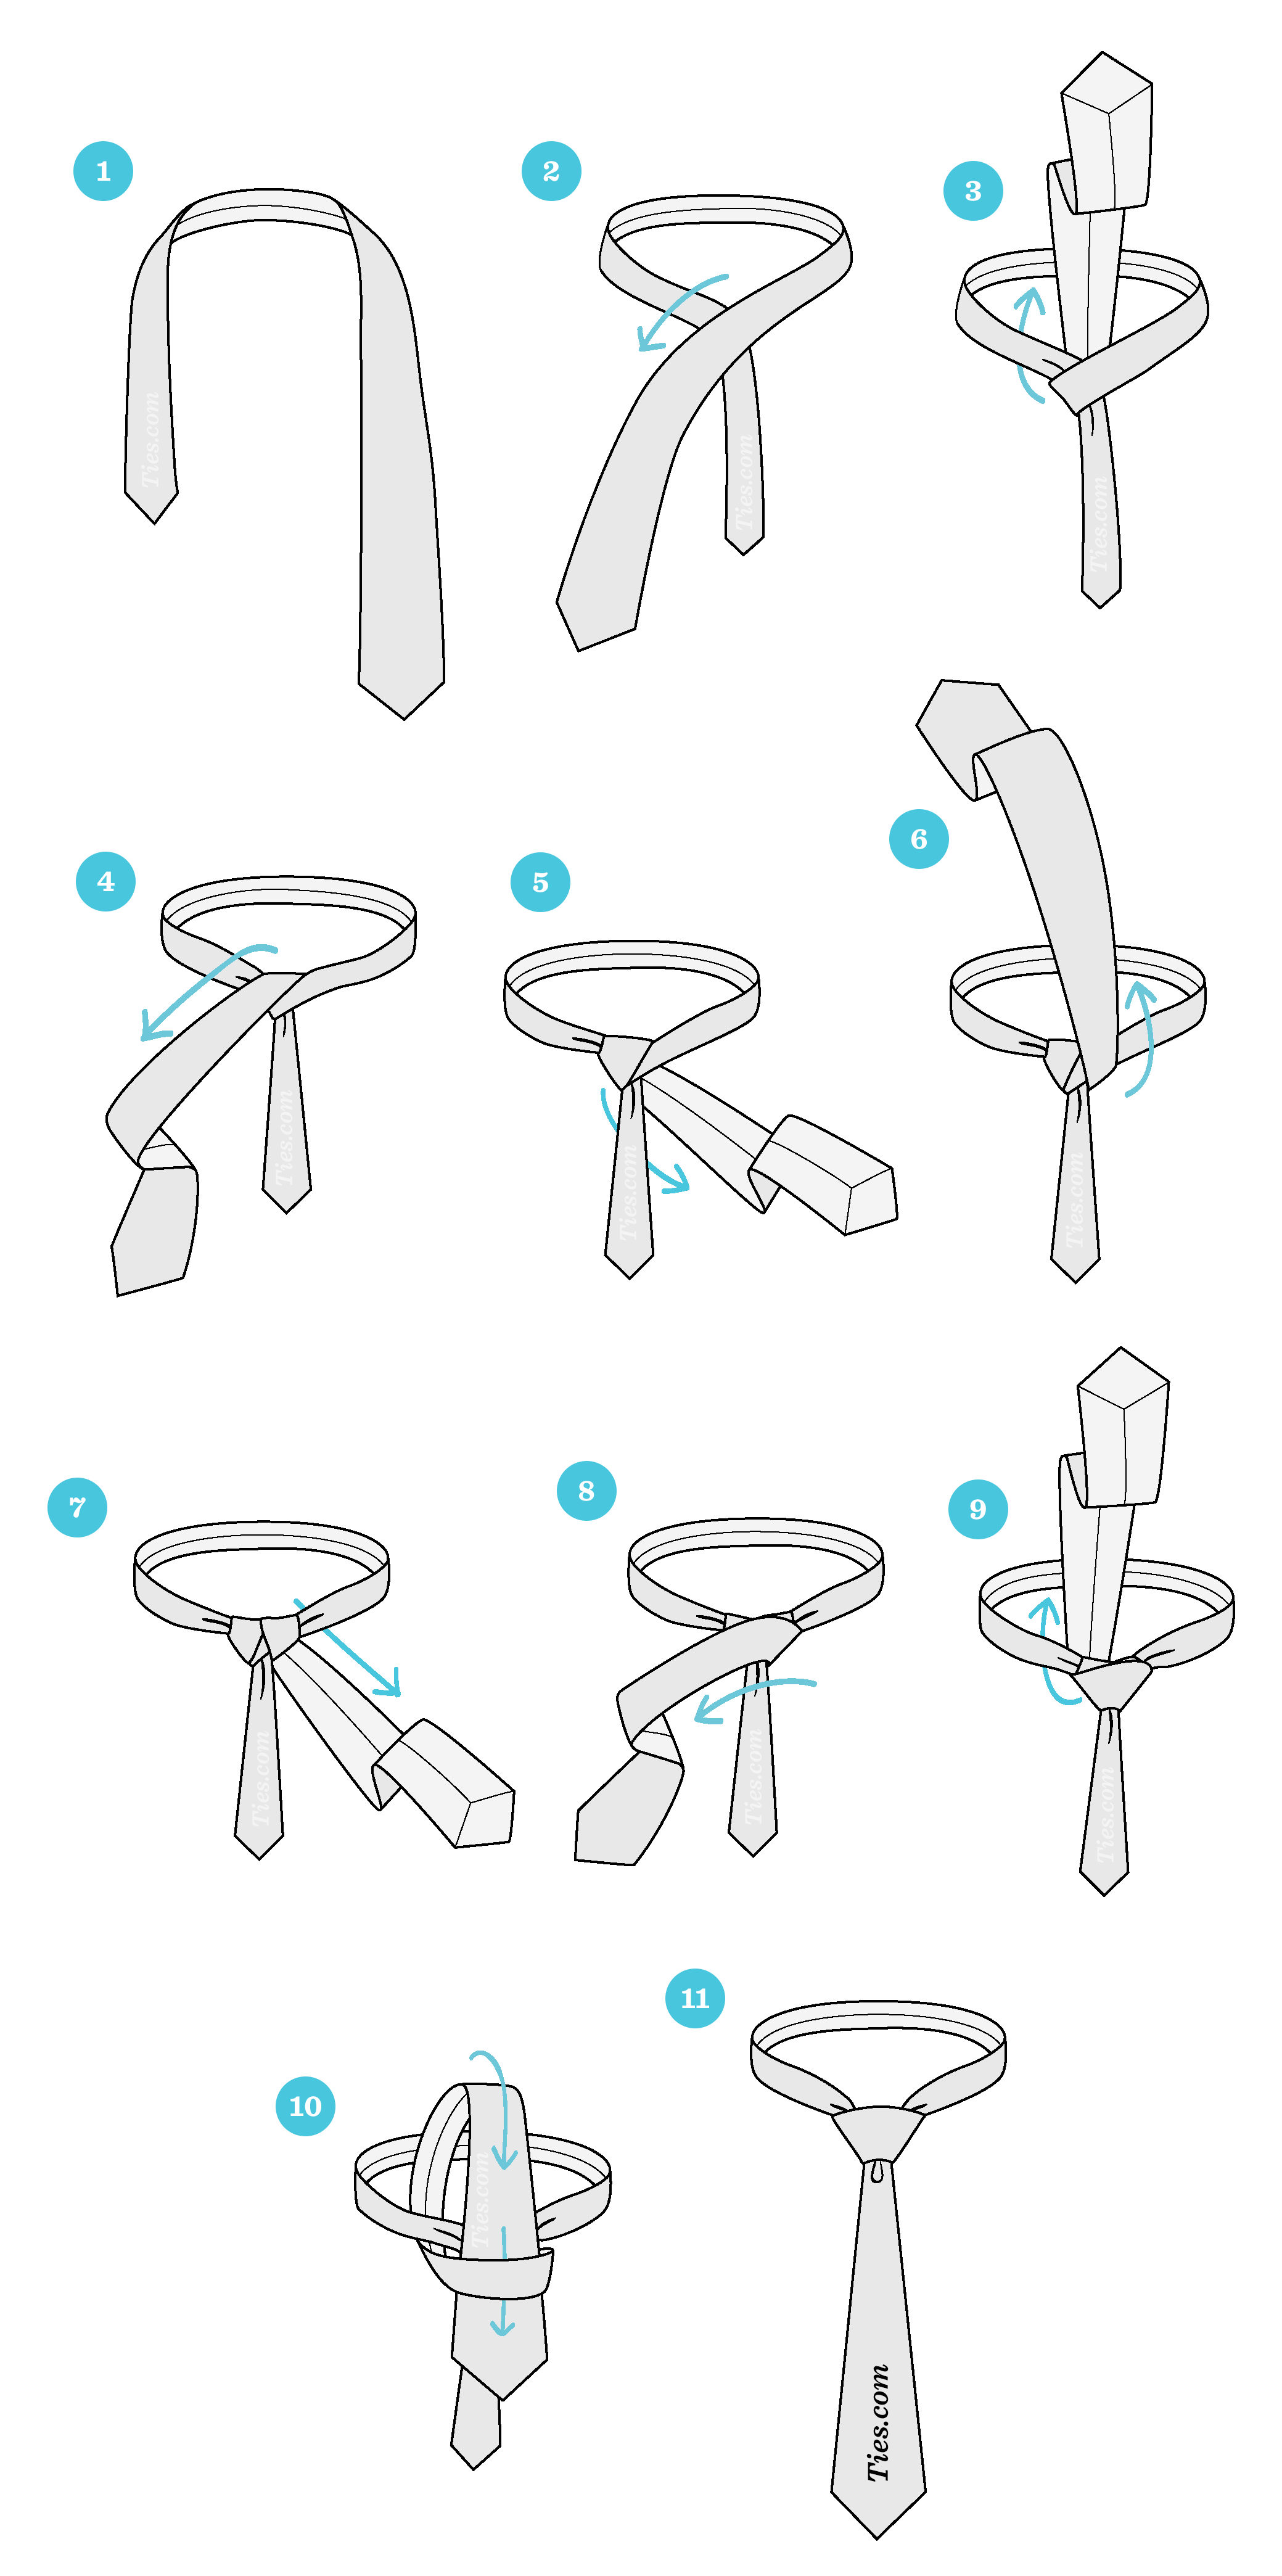 How to tie a tie: A step-by-step guide to 4 popular knots - The Manual